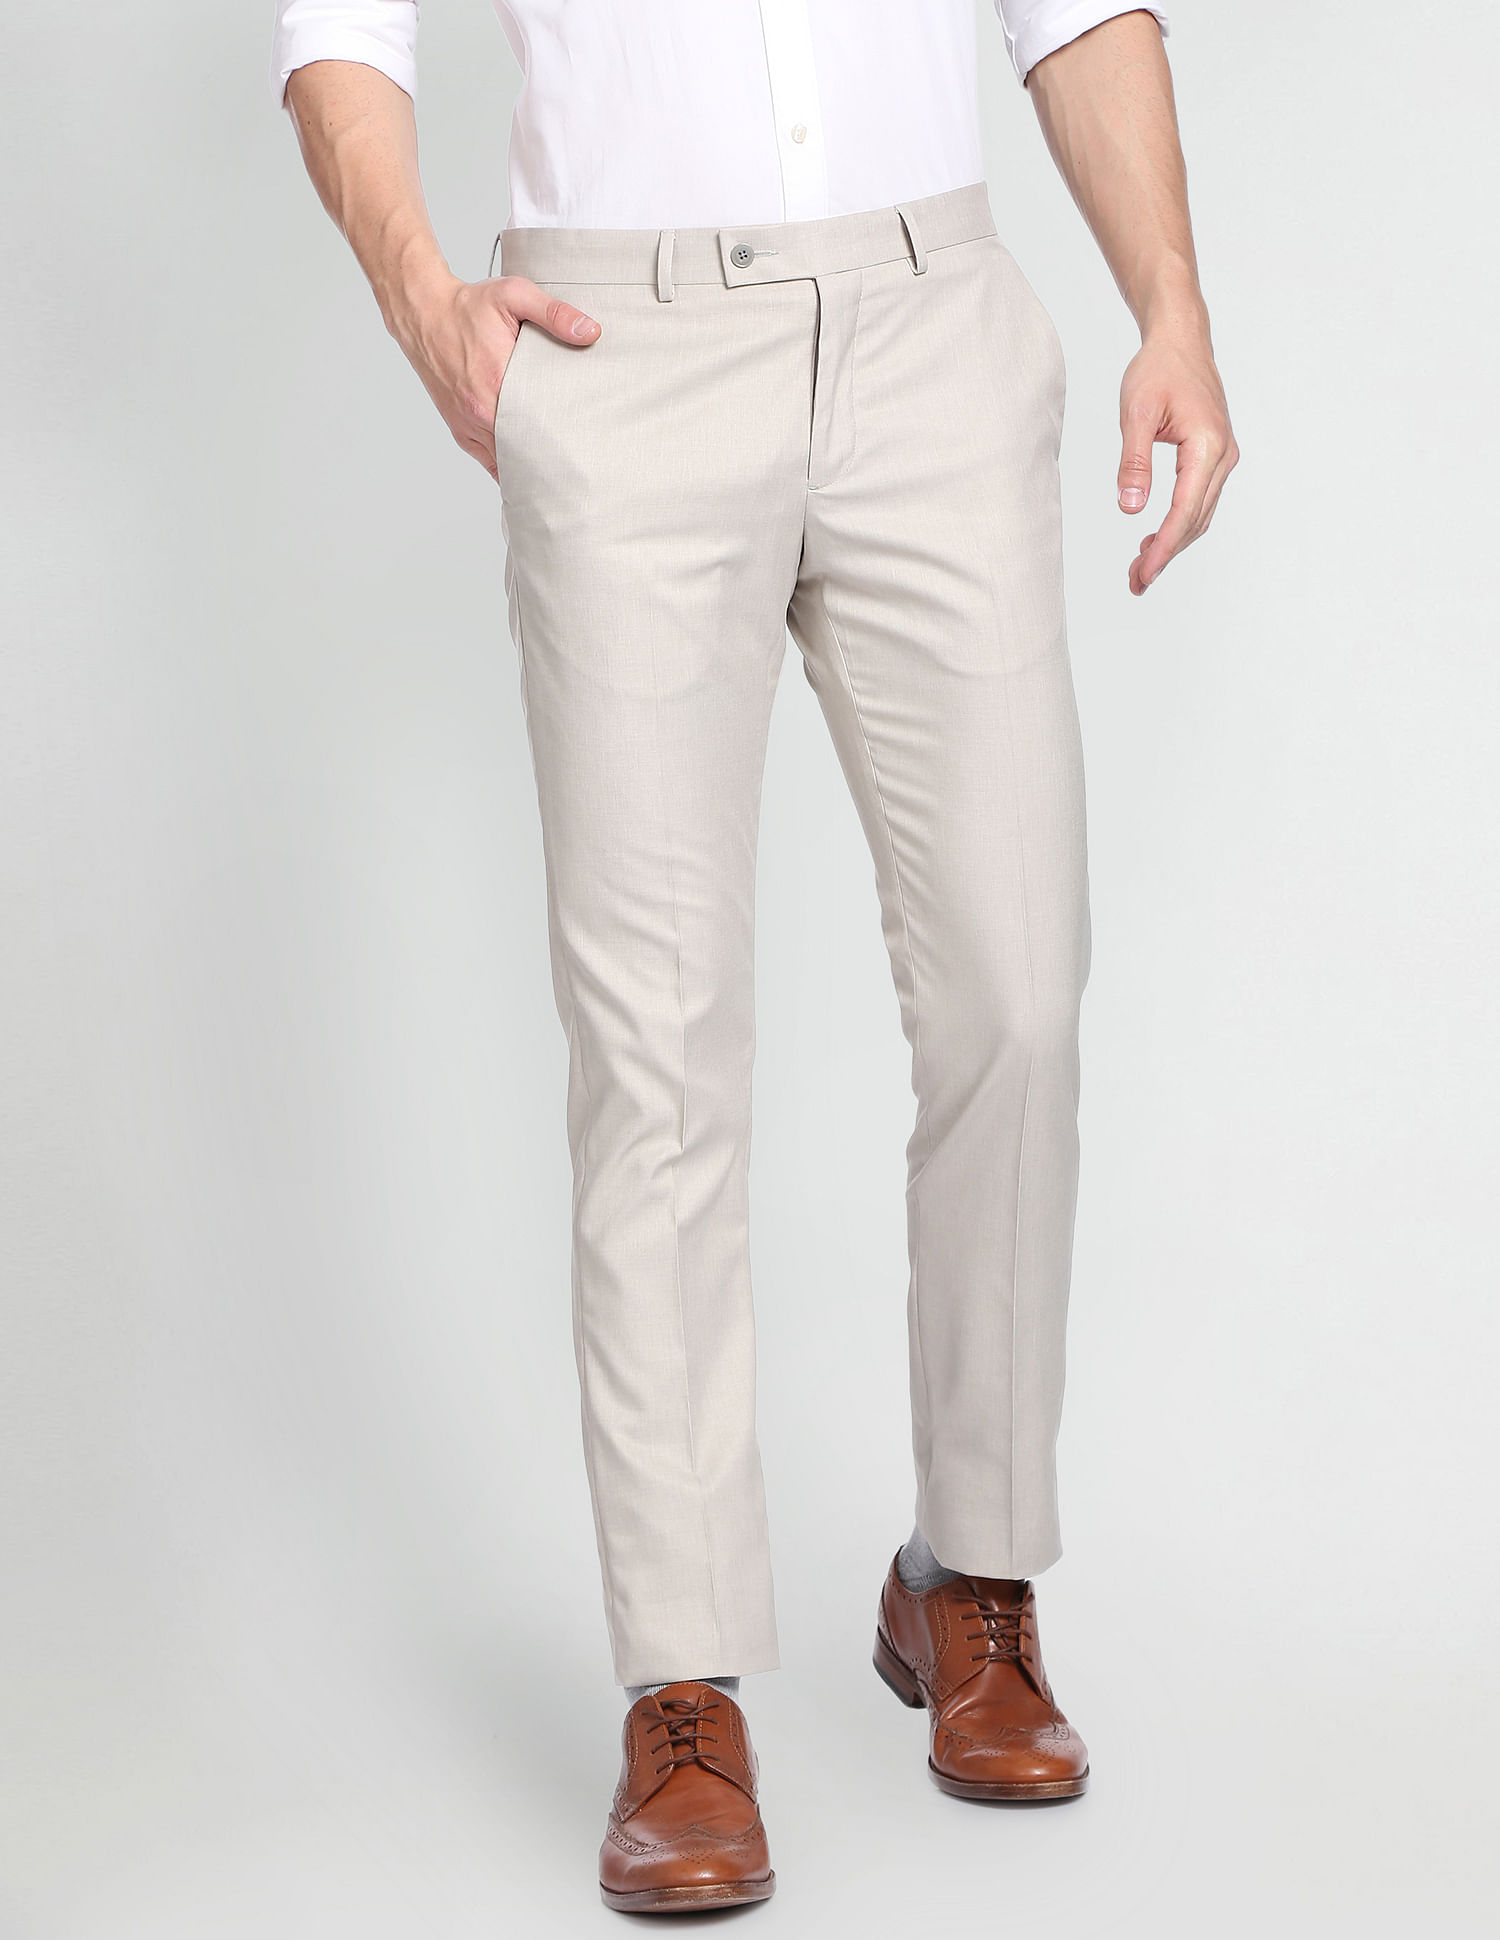 Mens trousers online and explore our timeless mens classic trousers